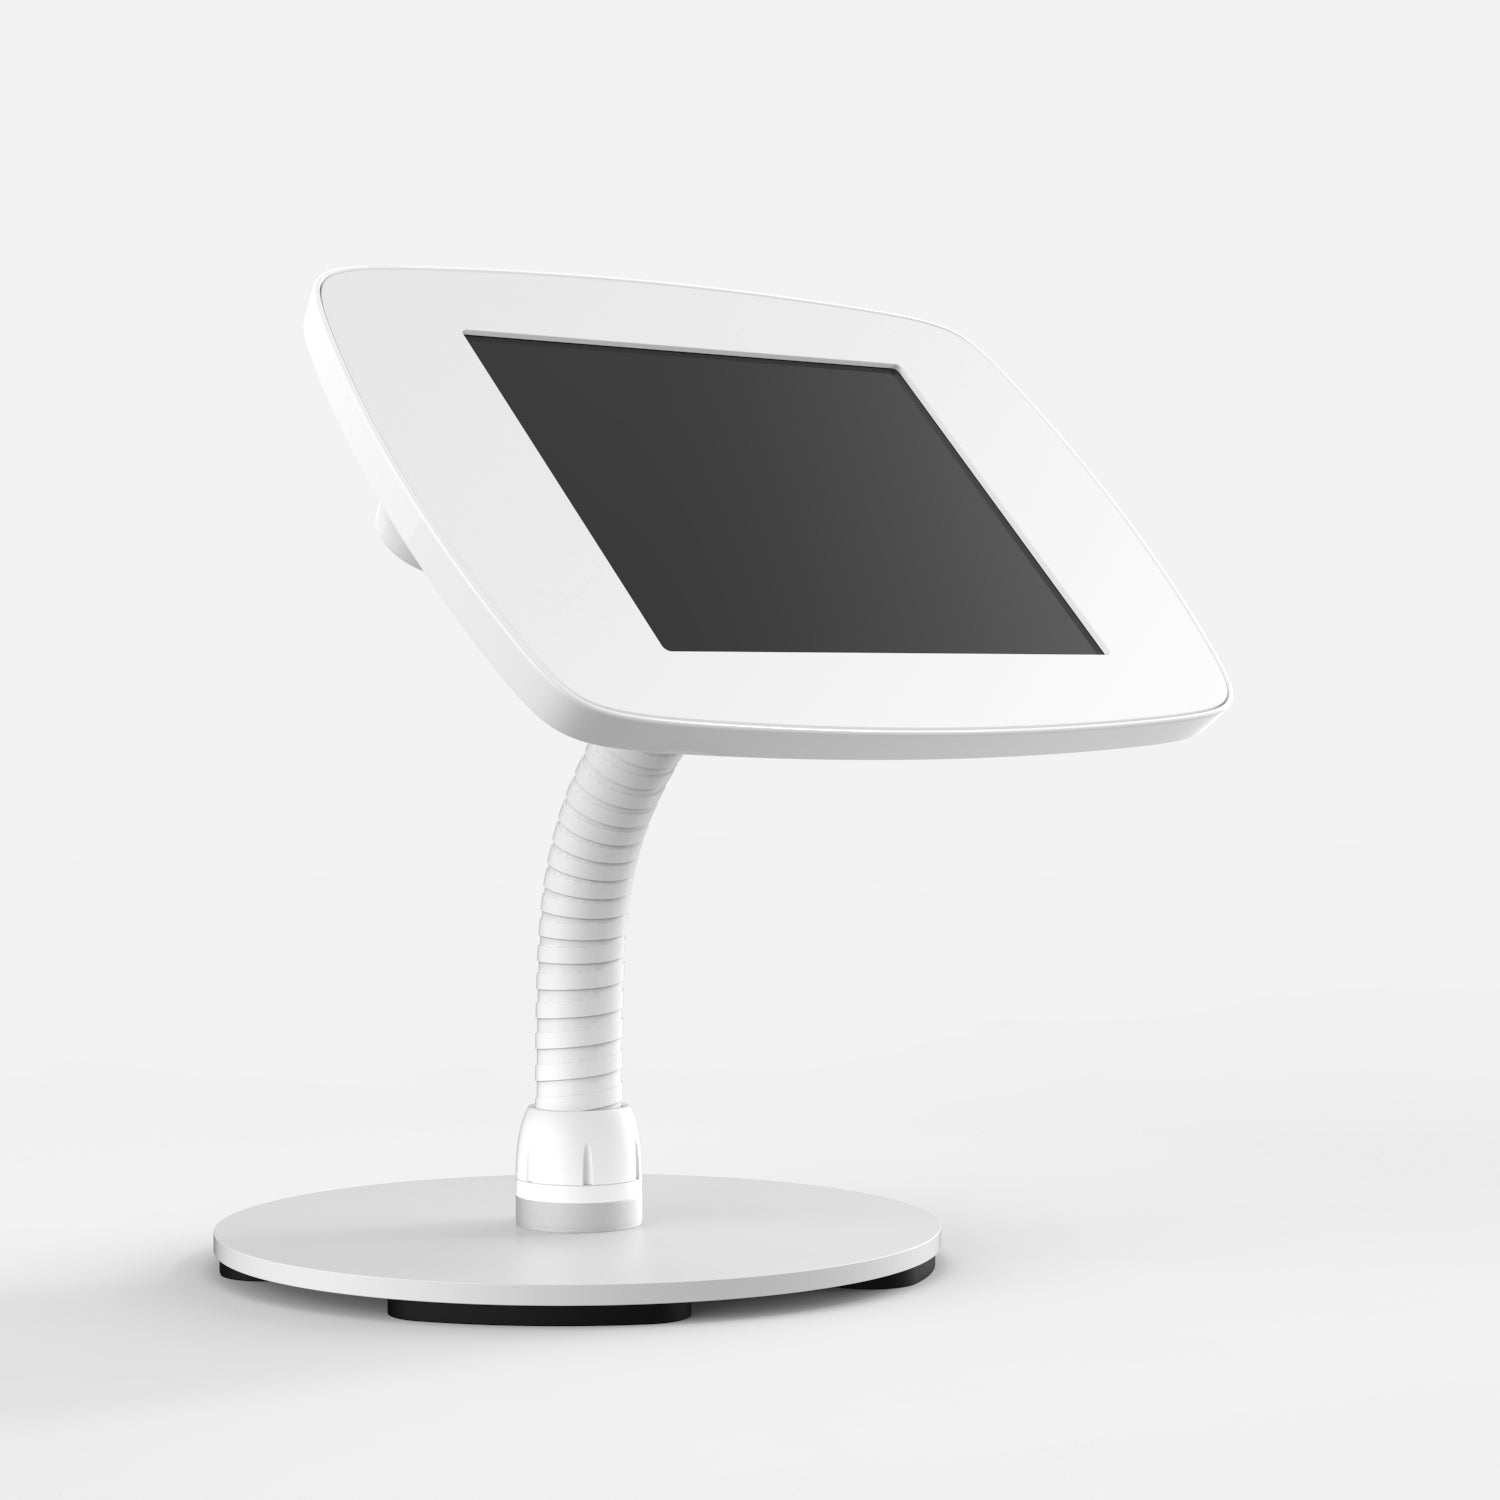 Bouncepad Counter Flex - A secure tablet & iPad gooseneck stand in white.